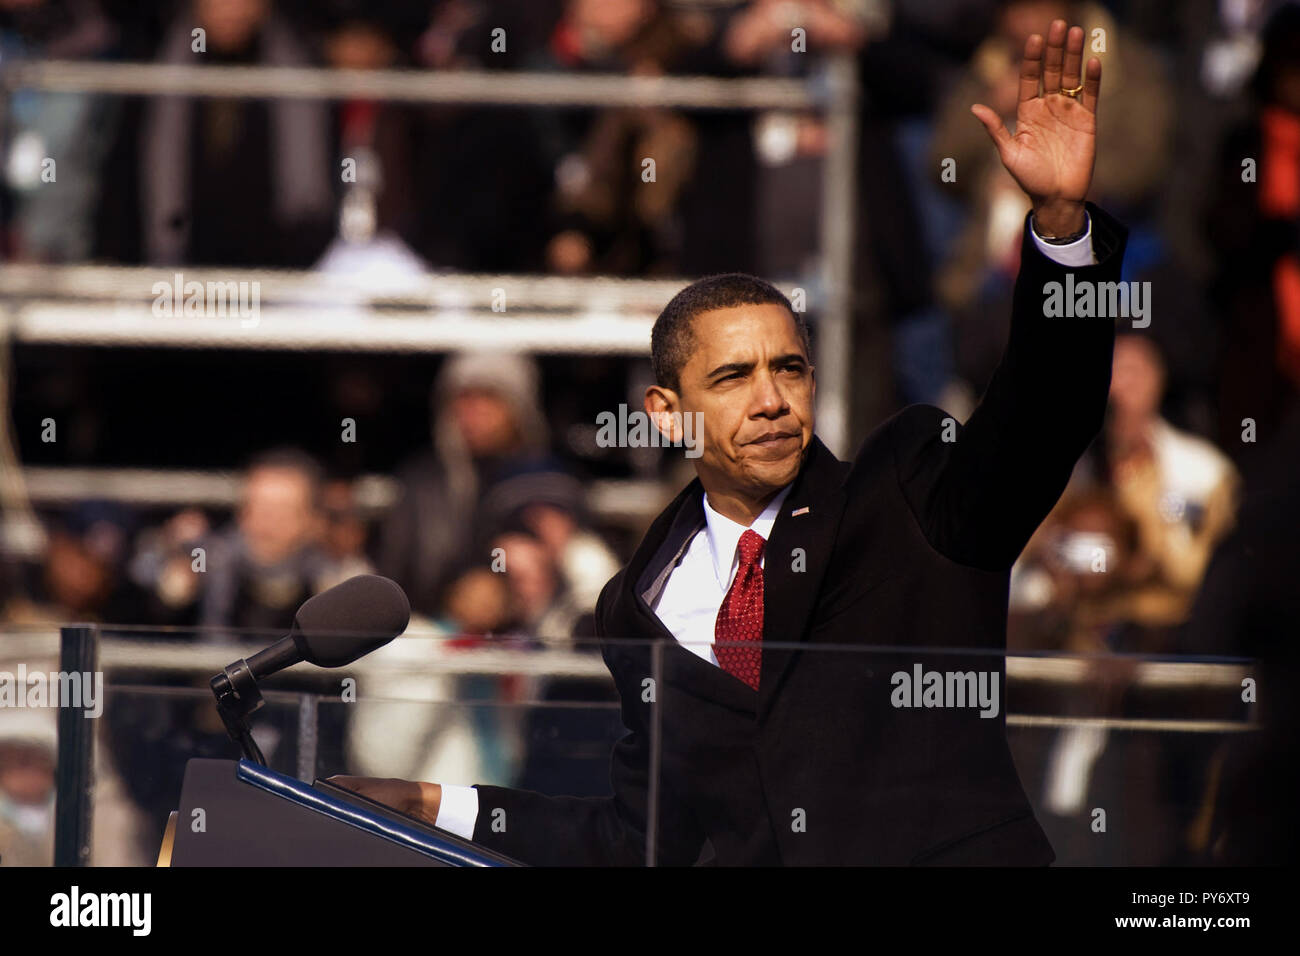 The 44th President of the United States Barack Obama waves to the crowd at the conclusion of his inaugural address, Washington, D.C., Jan. 20, 2009 Stock Photo